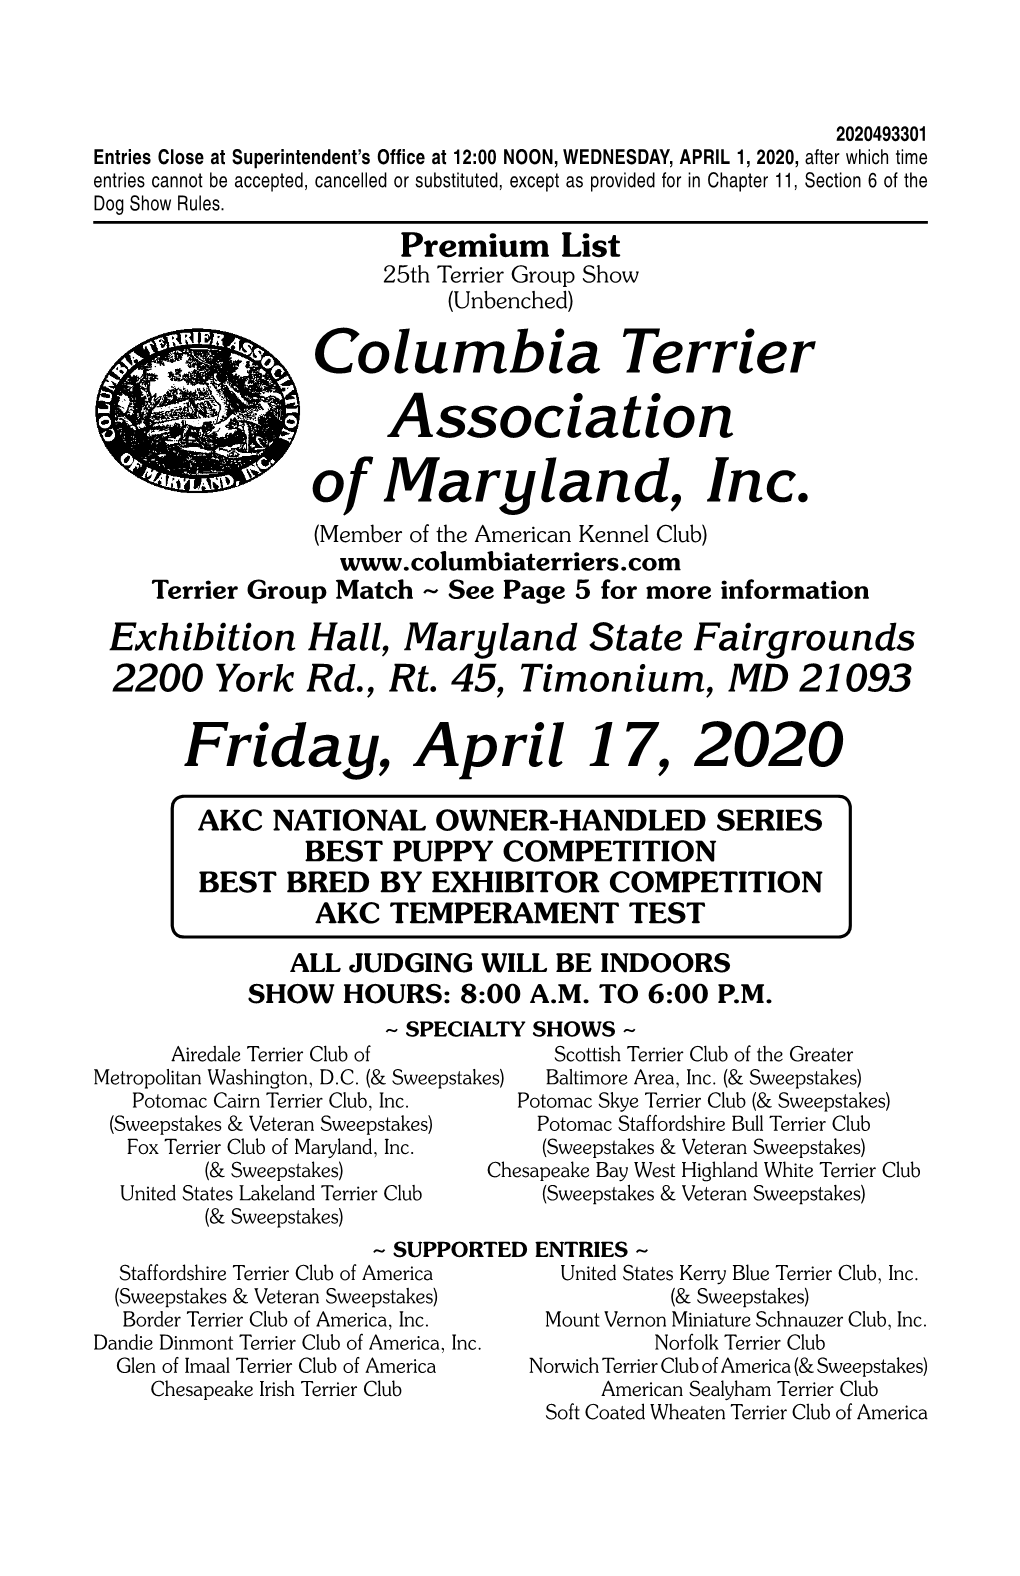 Columbia Terrier Association of Maryland, Inc. Friday, April 17, 2020